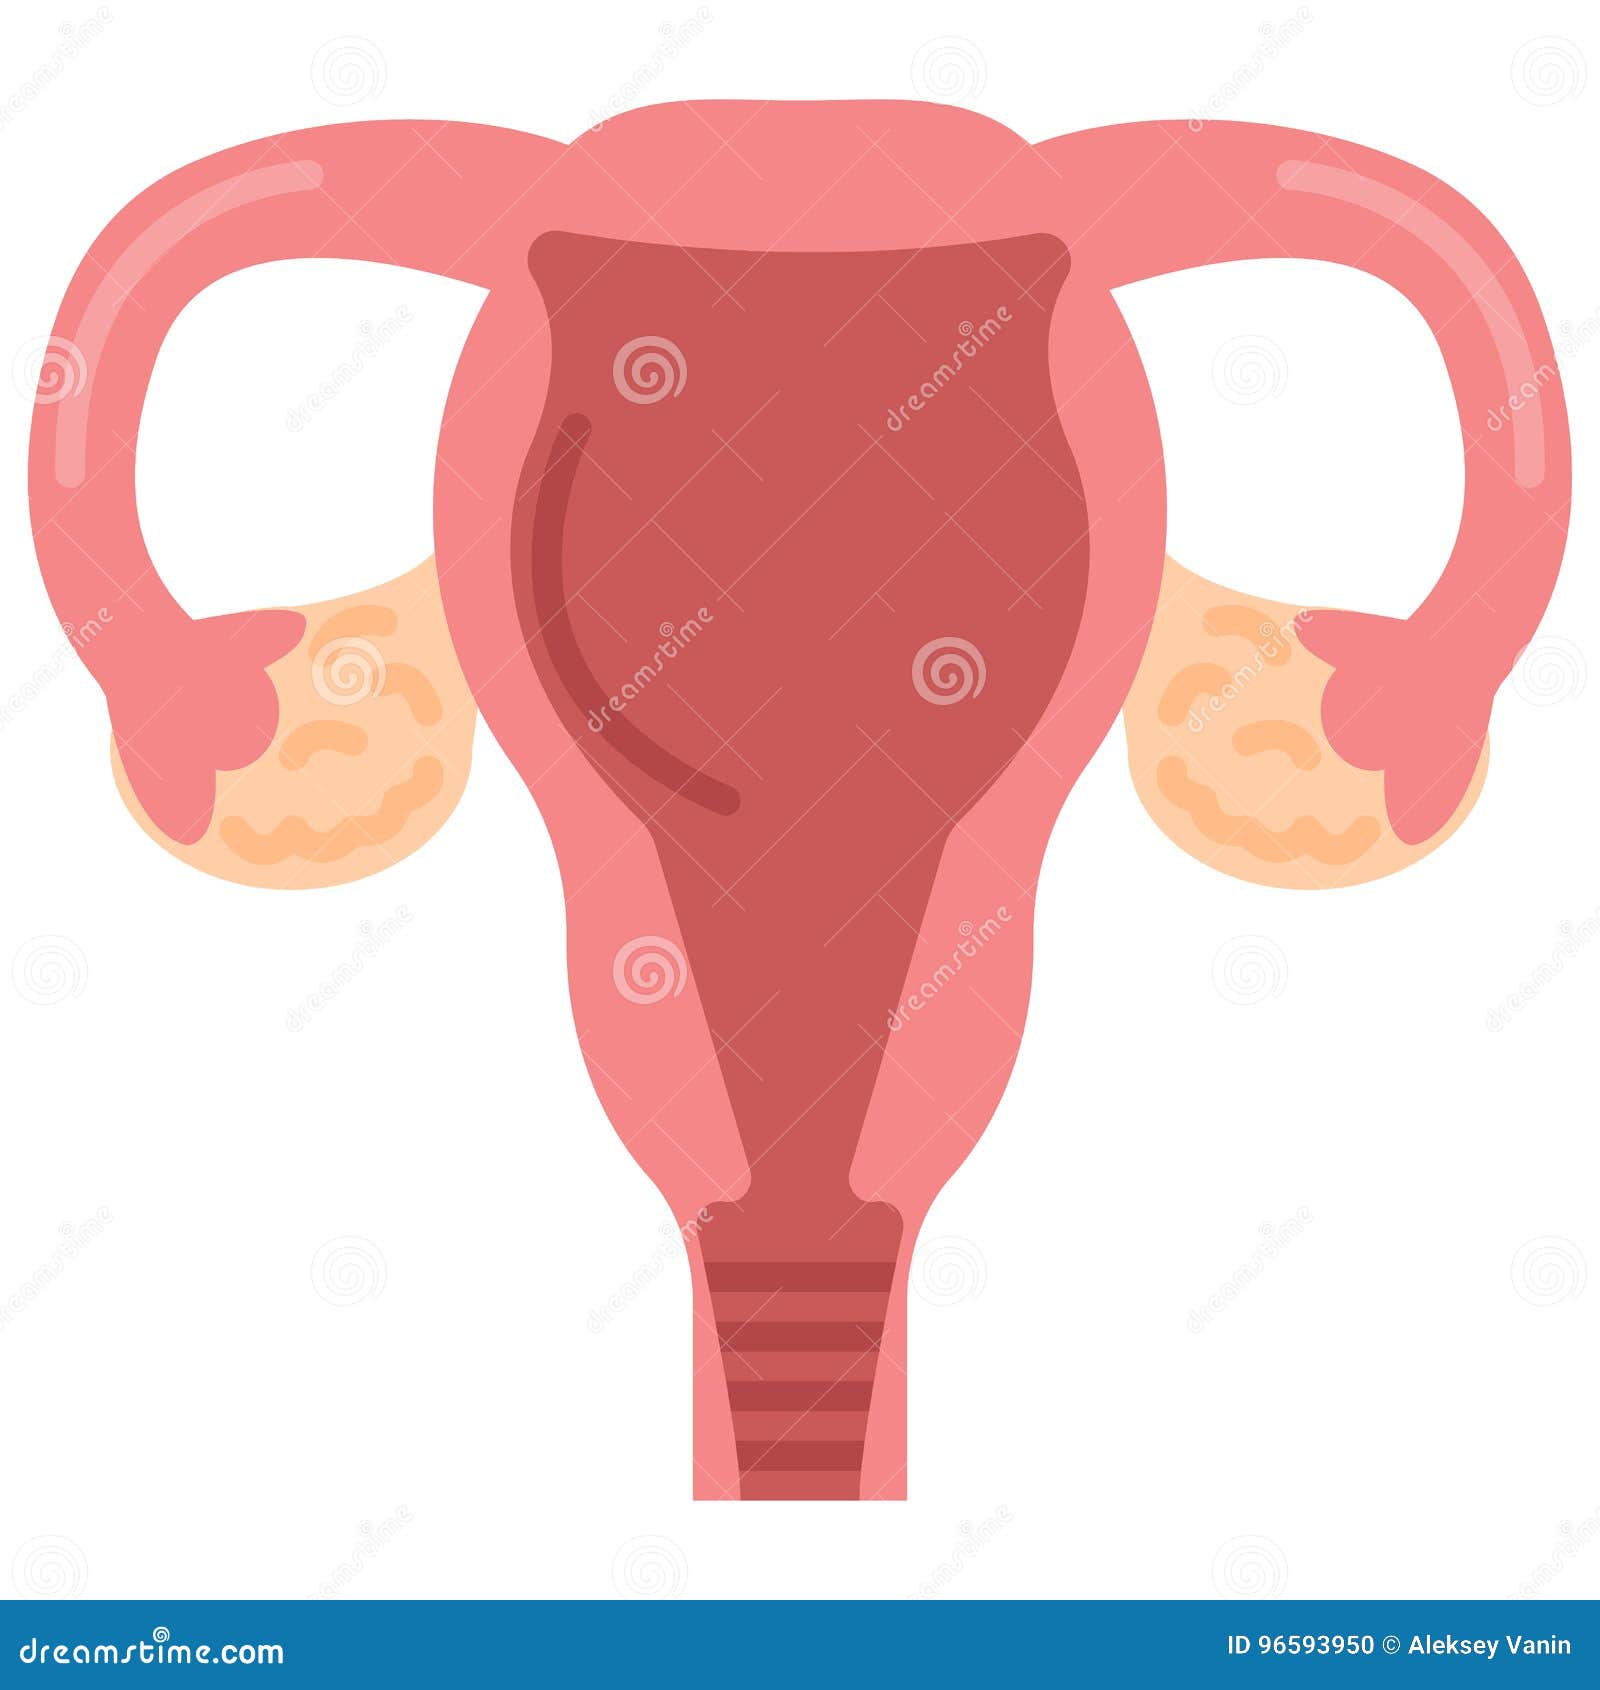 Uterus Womb with Ovary, Cervix, Fallopian Tubes Icon, Vector ...